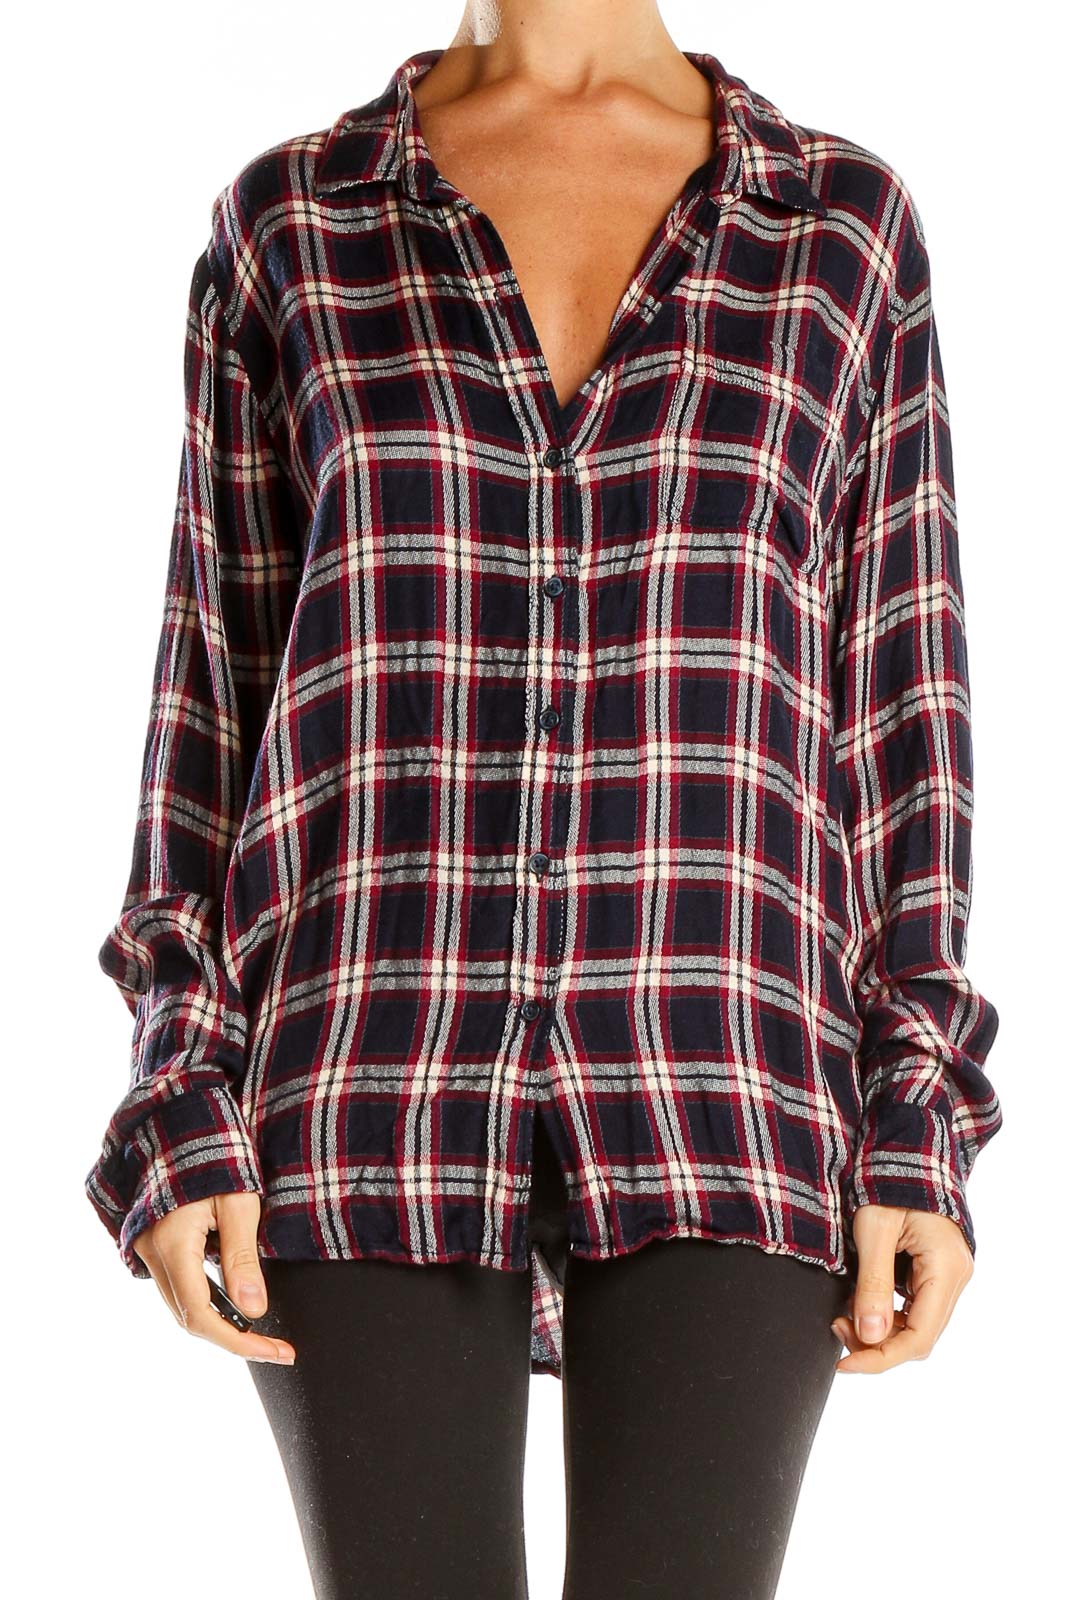 Black Red Plaid All Day Wear Top Front